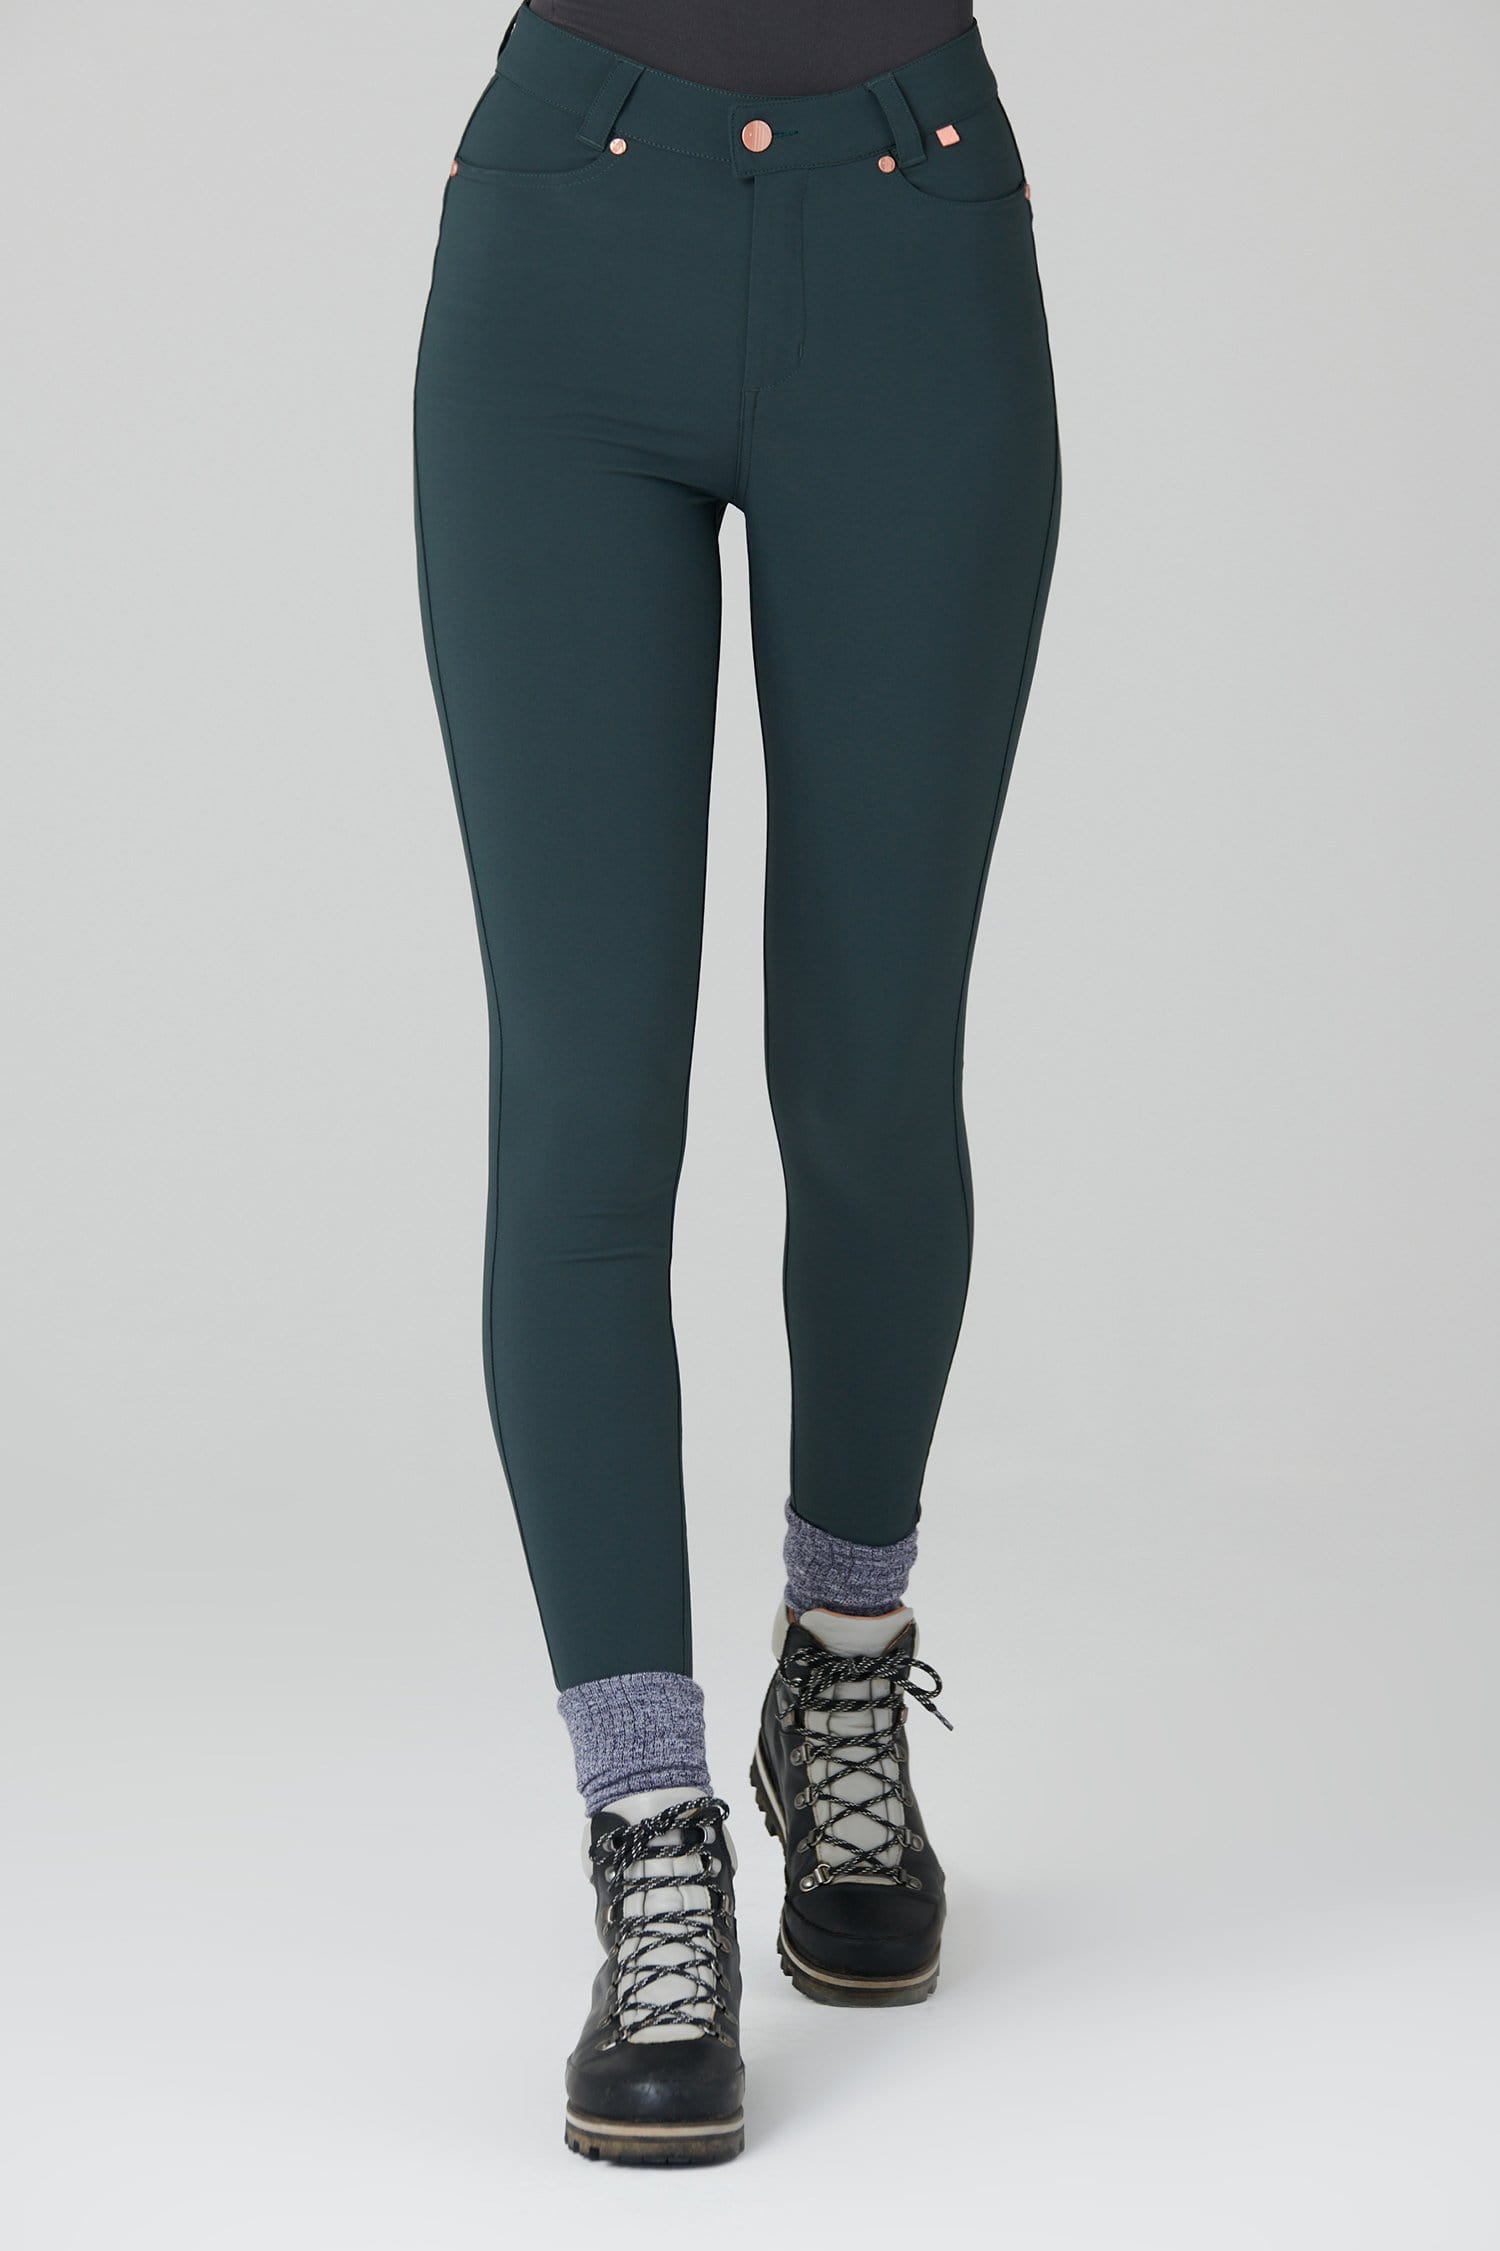 Thermal Skinny Outdoor Trousers - Forest Green - 38r / Uk20 - Womens - Acai Outdoorwear